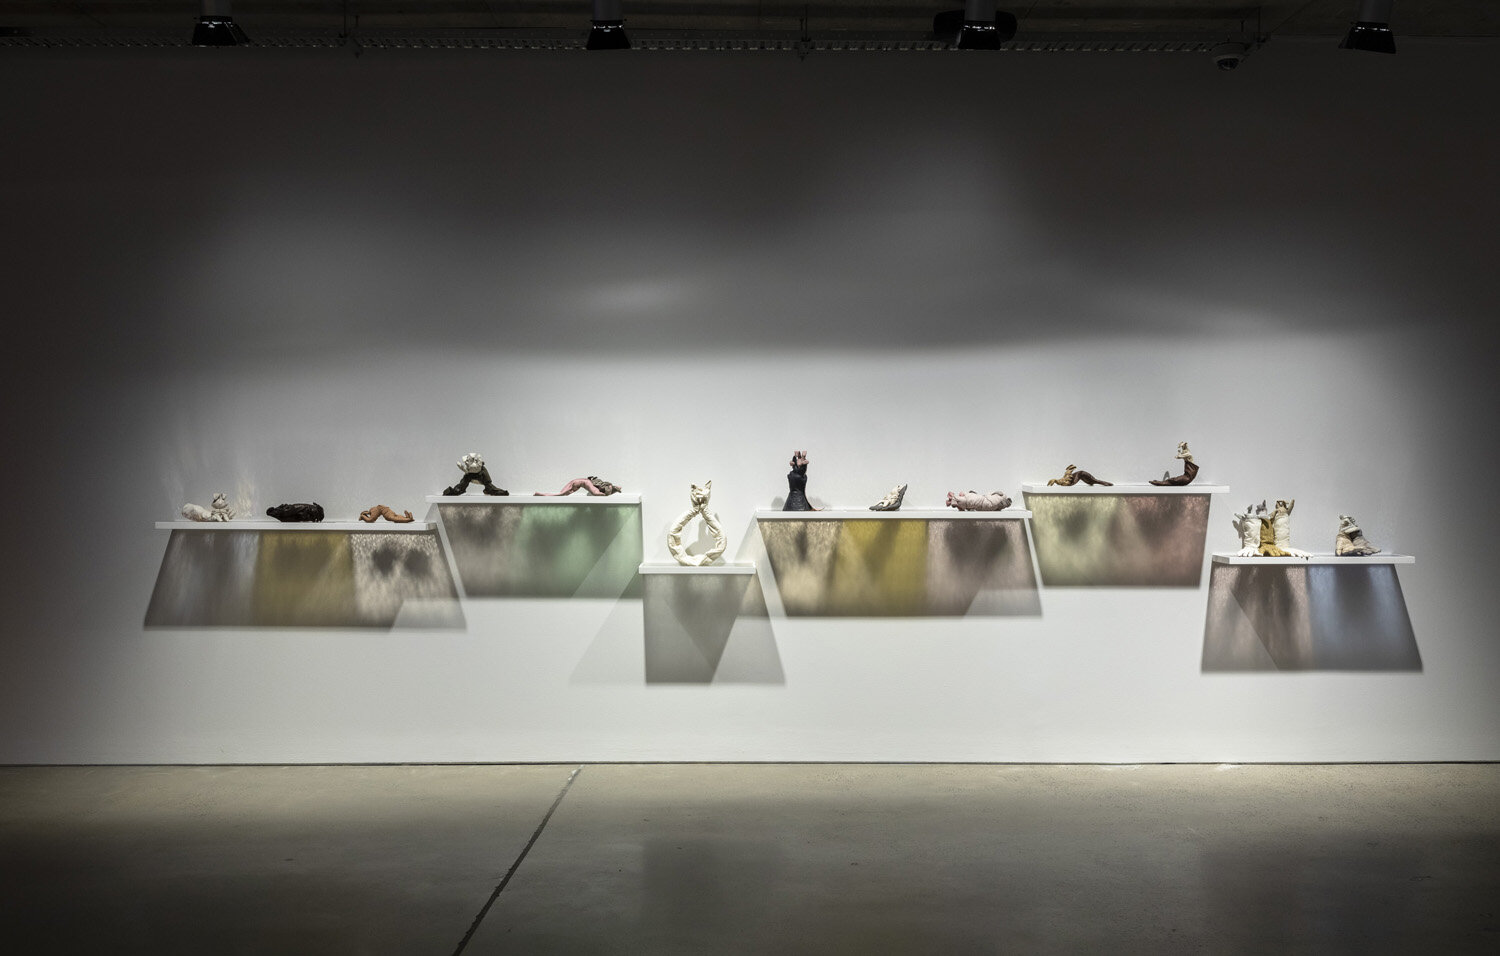   Bunnies in Love, Lust and Longing , 2015-19, found leather, suede and synthetic gloves, millinery wire, thread, weighted curtain cord, fabric, glass, wood, paint, install approx. 550 x 100 x 20cm, Four Letter Word at Artbank, Sydney. 